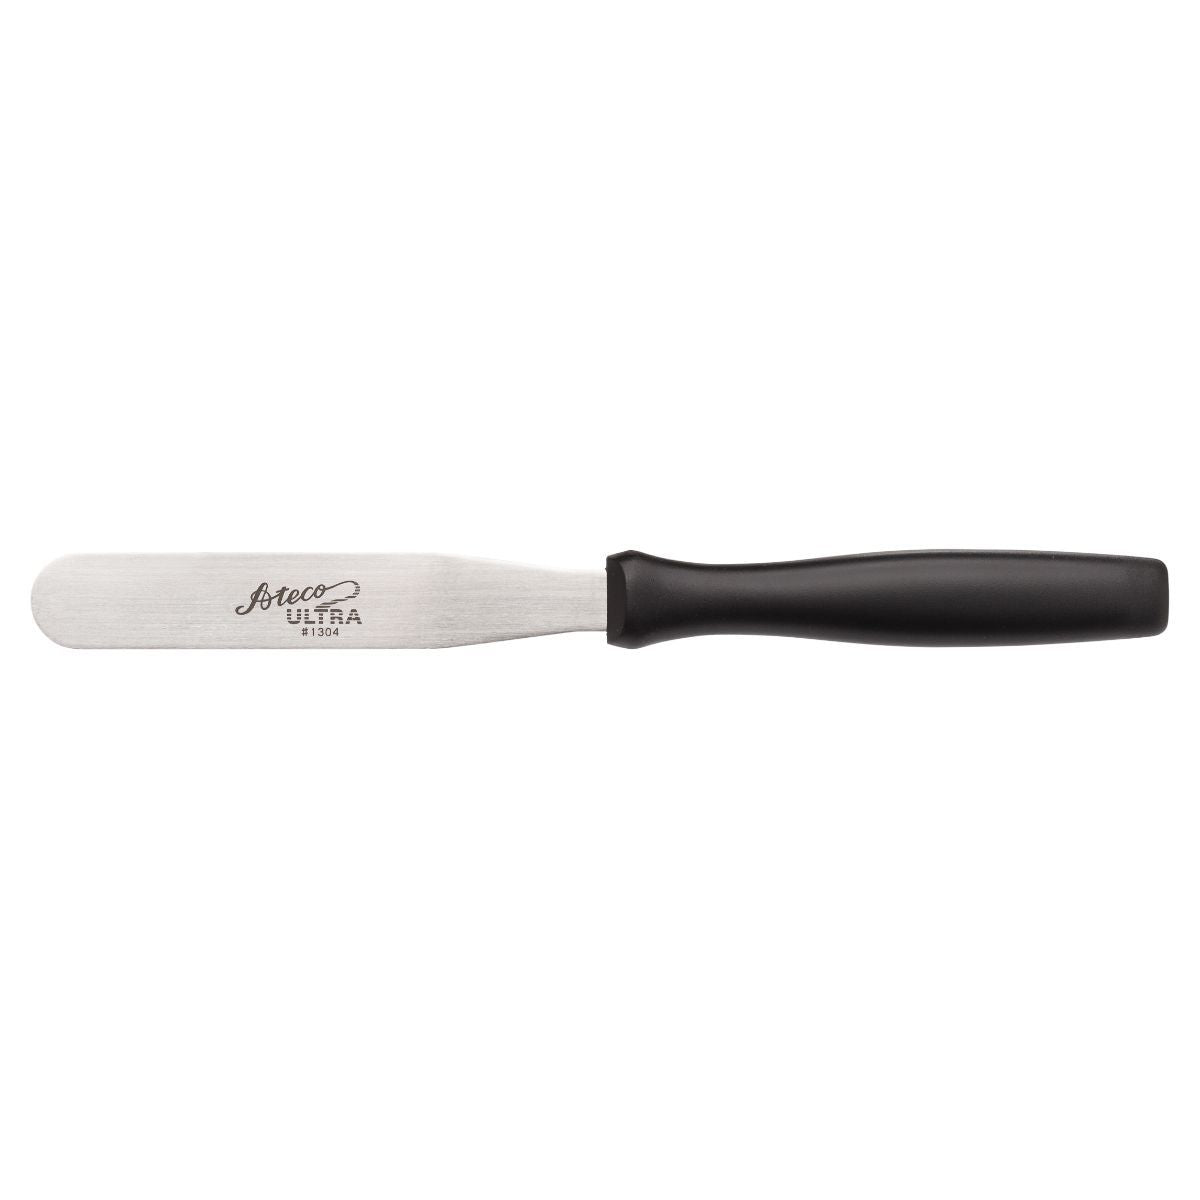 Ateco 1305 4 1/4 Blade Offset Baking / Icing Spatula with Plastic Handle